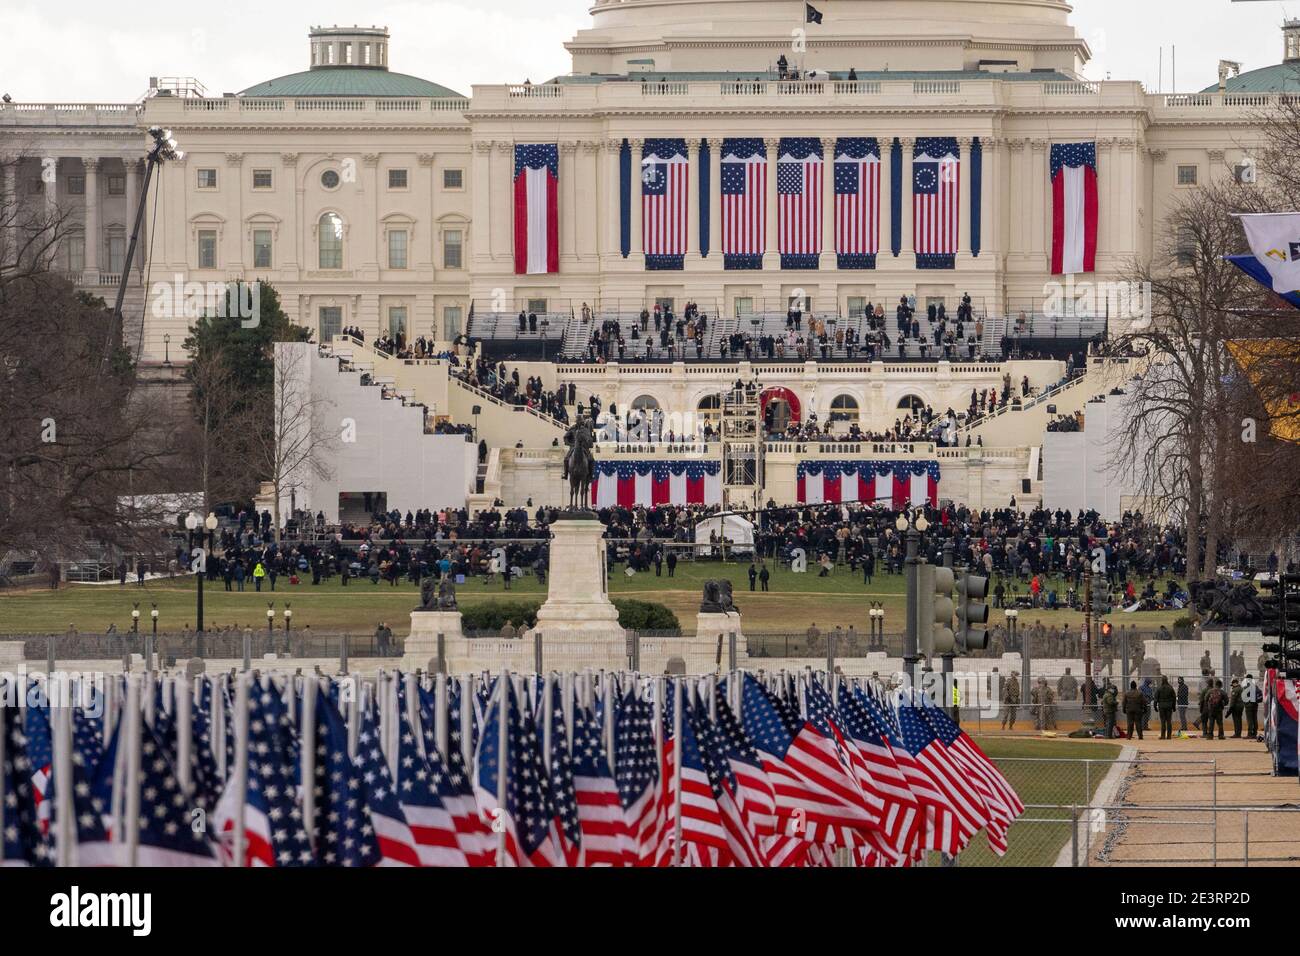 Washington, United States. 20th Jan, 2021. The view of the U.S. Capitol prior to President Joseph Robinette Biden Jr. taking the oath of office as the 46th President of the United States at the Capitol in Washington, DC on Wednesday, January 20, 2021. Photo by Ken Cedeno/UPI Credit: UPI/Alamy Live News Stock Photo